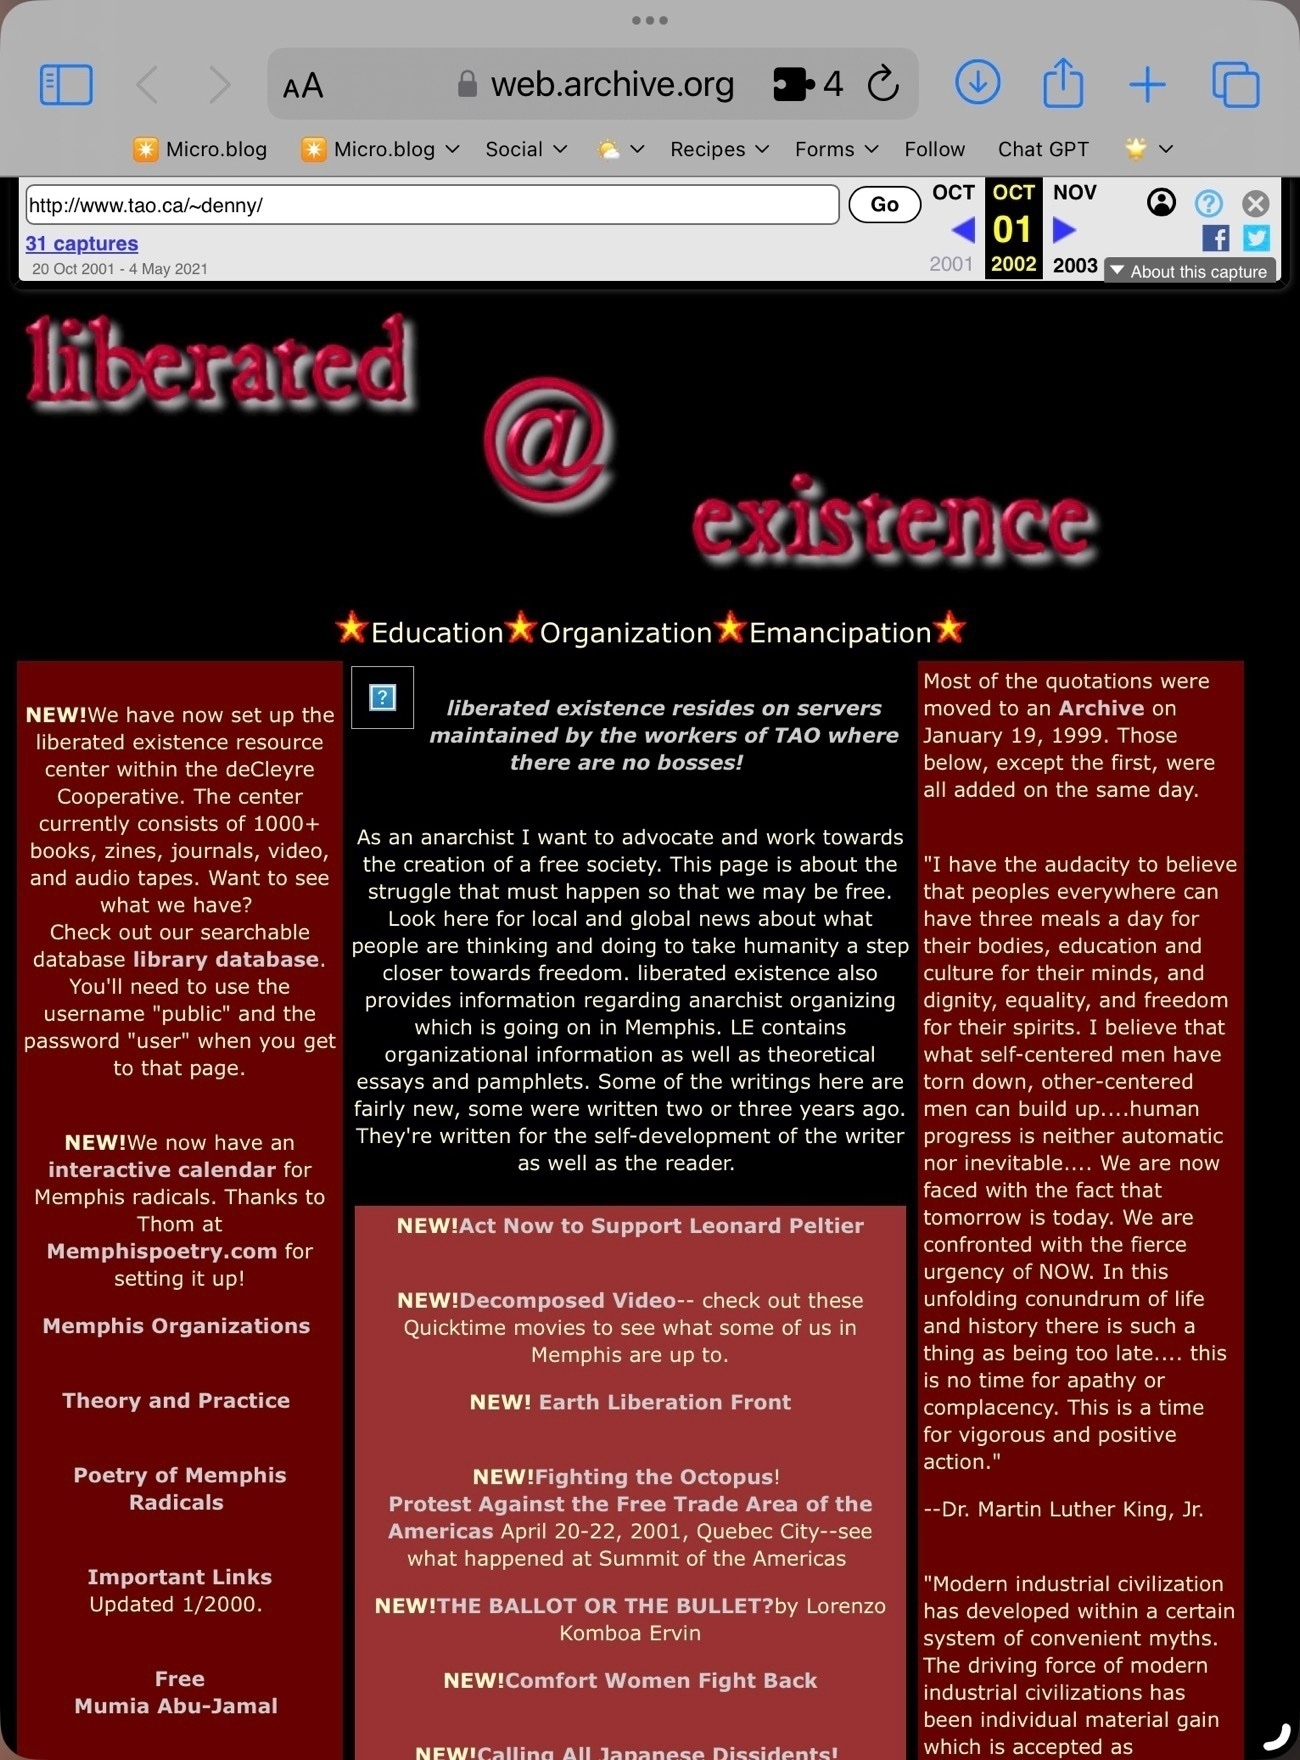 A screenshot of the authors first website, Liberated Existence. An exceprt  of the text from the main body: liberated existence resides on servers maintained by the workers of TAO where there are no bosses! 
As an anarchist I want to advocate and work towards the creation of a free society. This page is about the struggle that must happen so that we may be free. Look here for local and global news about what people are thinking and doing to take humanity a step closer towards freedom. liberated existence also provides information regarding anarchist organizing which is going on in Memphis. LE contains organizational information as well as theoretical essays and pamphlets. Some of the writings here are fairly new, some were written two or three years ago. They're written for the self-development of the writer as well as the reader. 